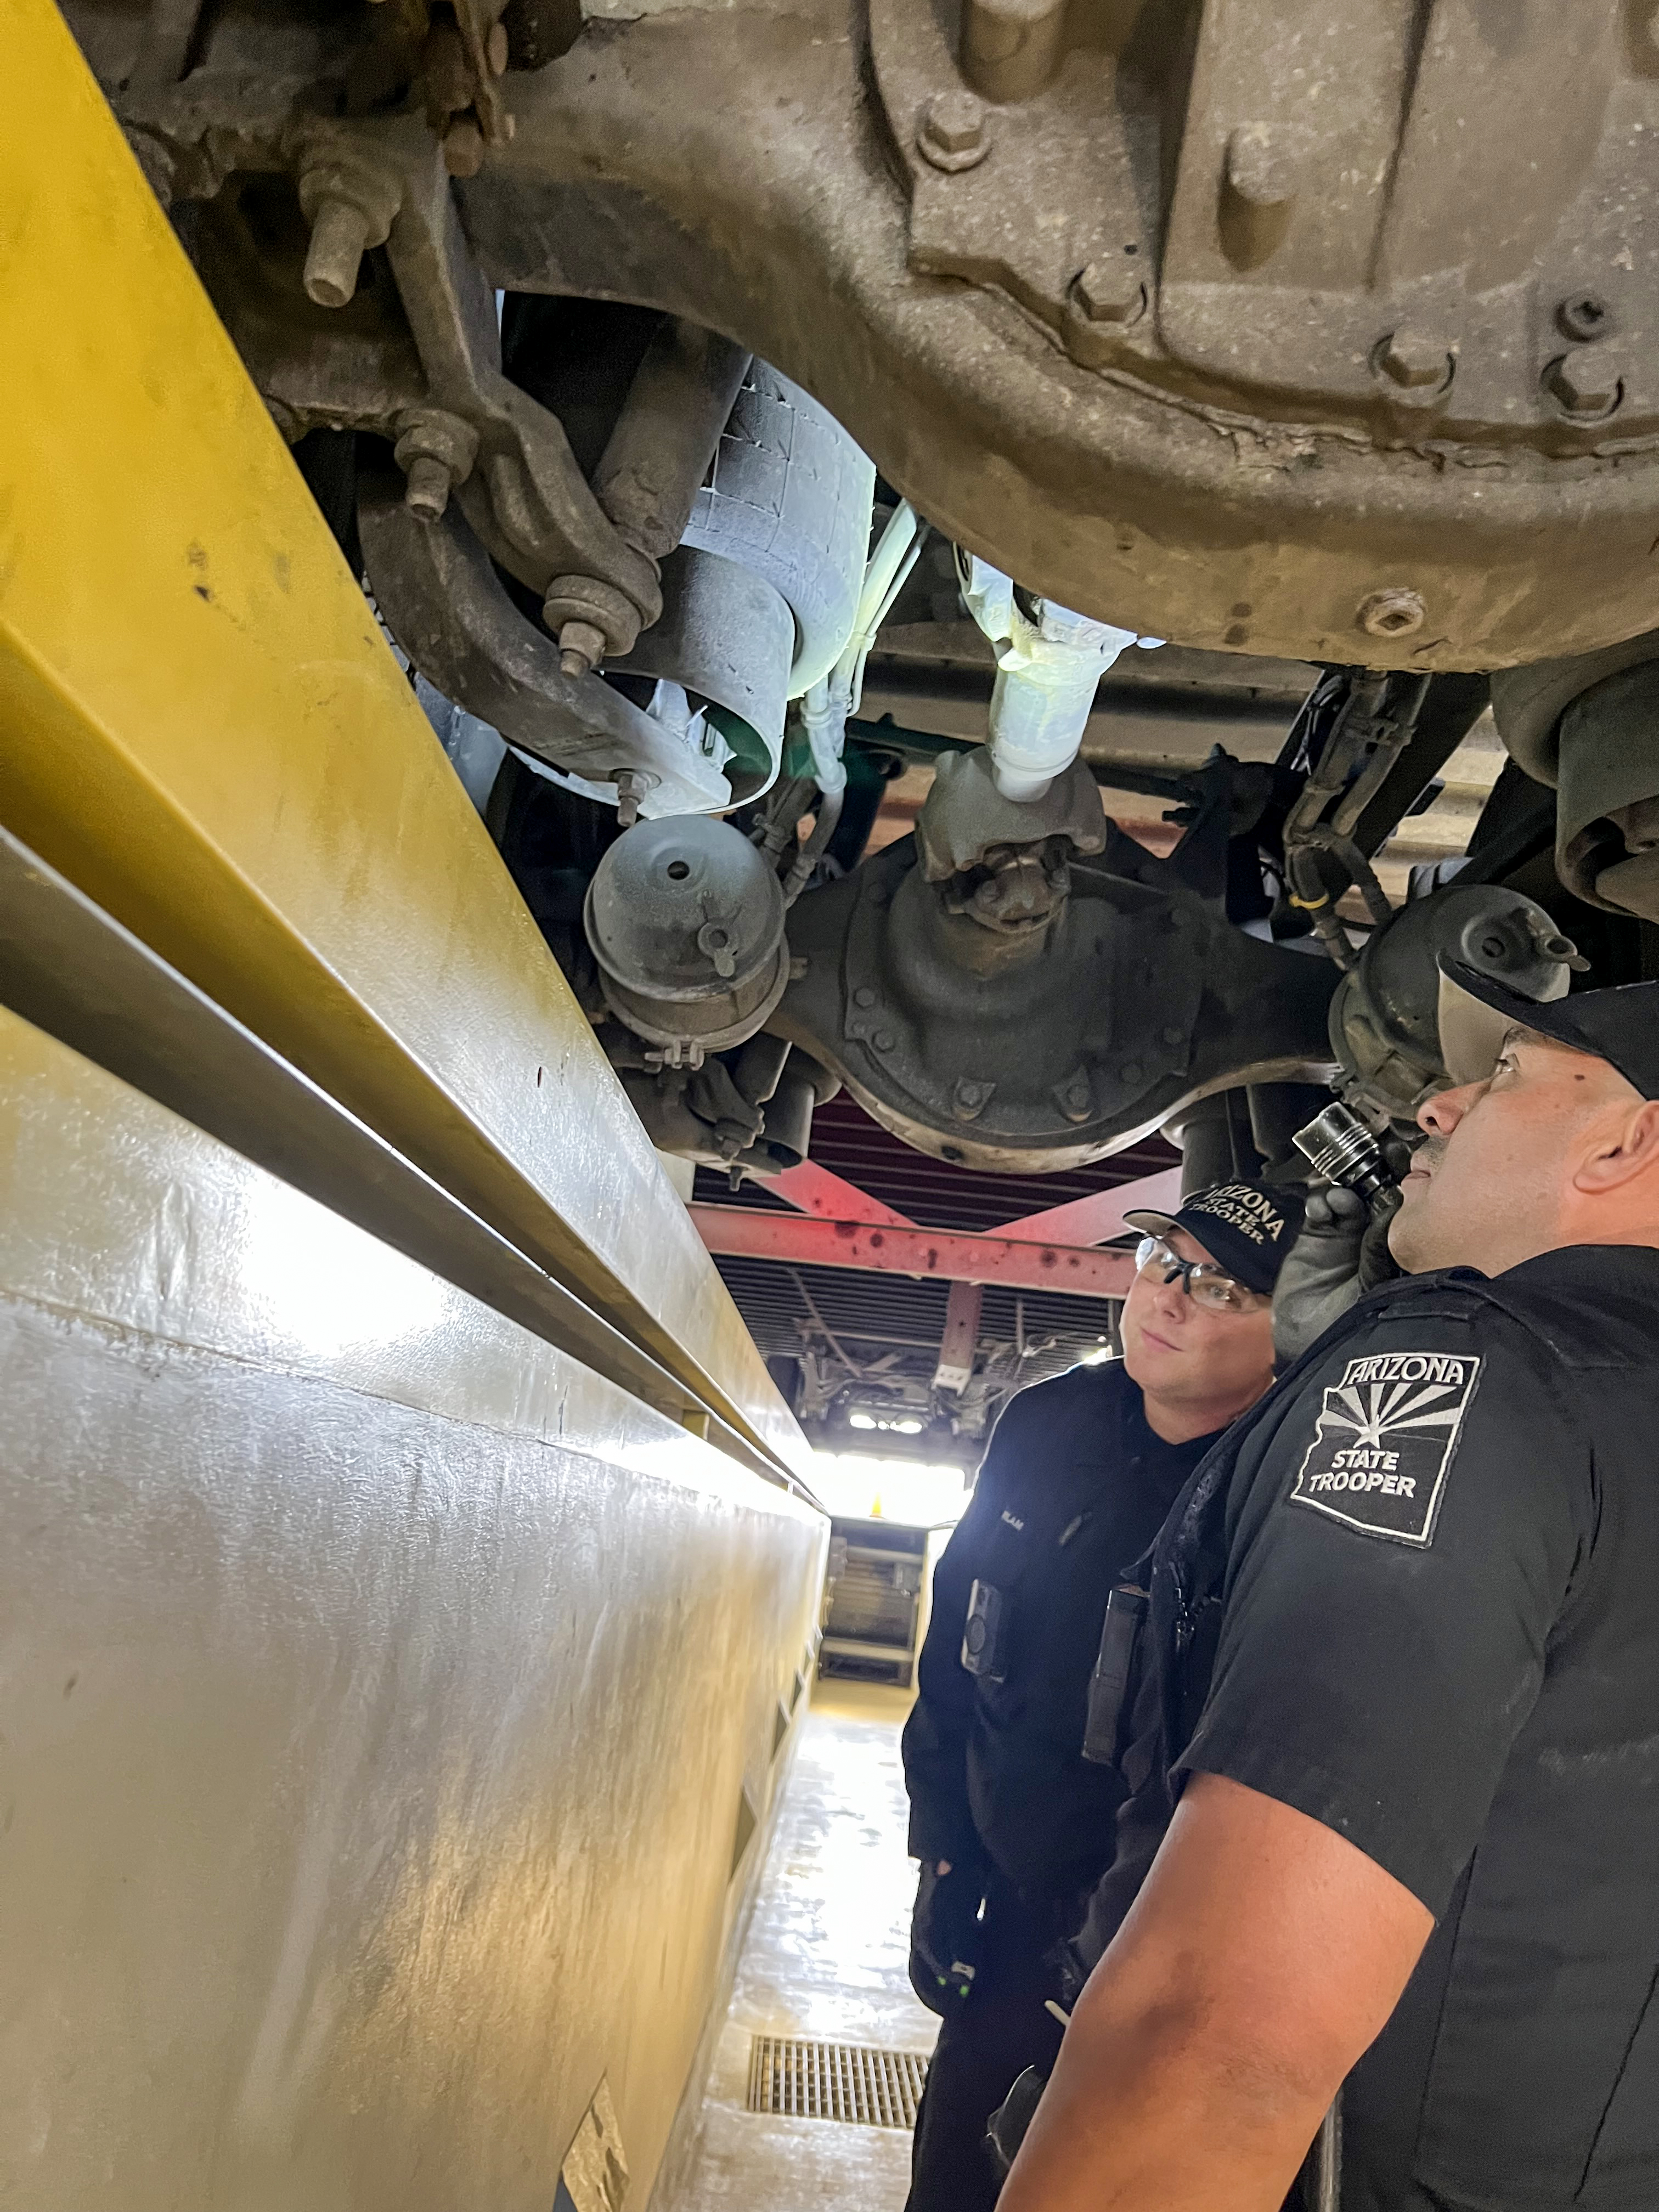 Two CVETF troopers look up at the underside of a semi-truck from an inspection bay